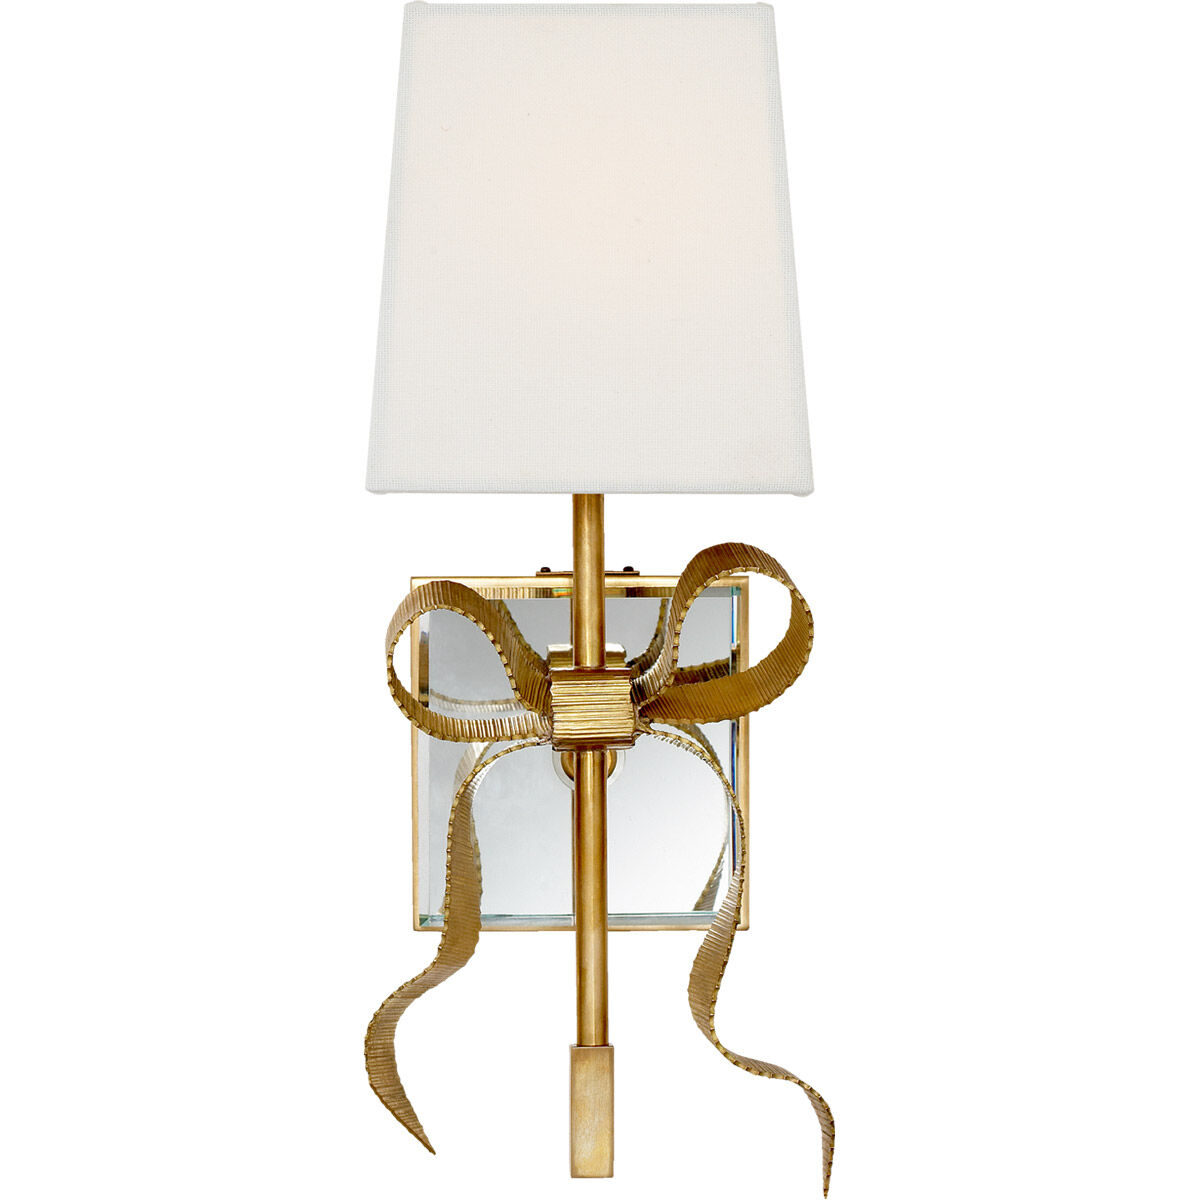 Visual Comfort Signature Collection | Visual Comfort KS2008PN-L kate spade  new york Ellery 1 Light 5 inch Polished Nickel Gros-Grain Bow Sconce Wall  Light in Cream Linen